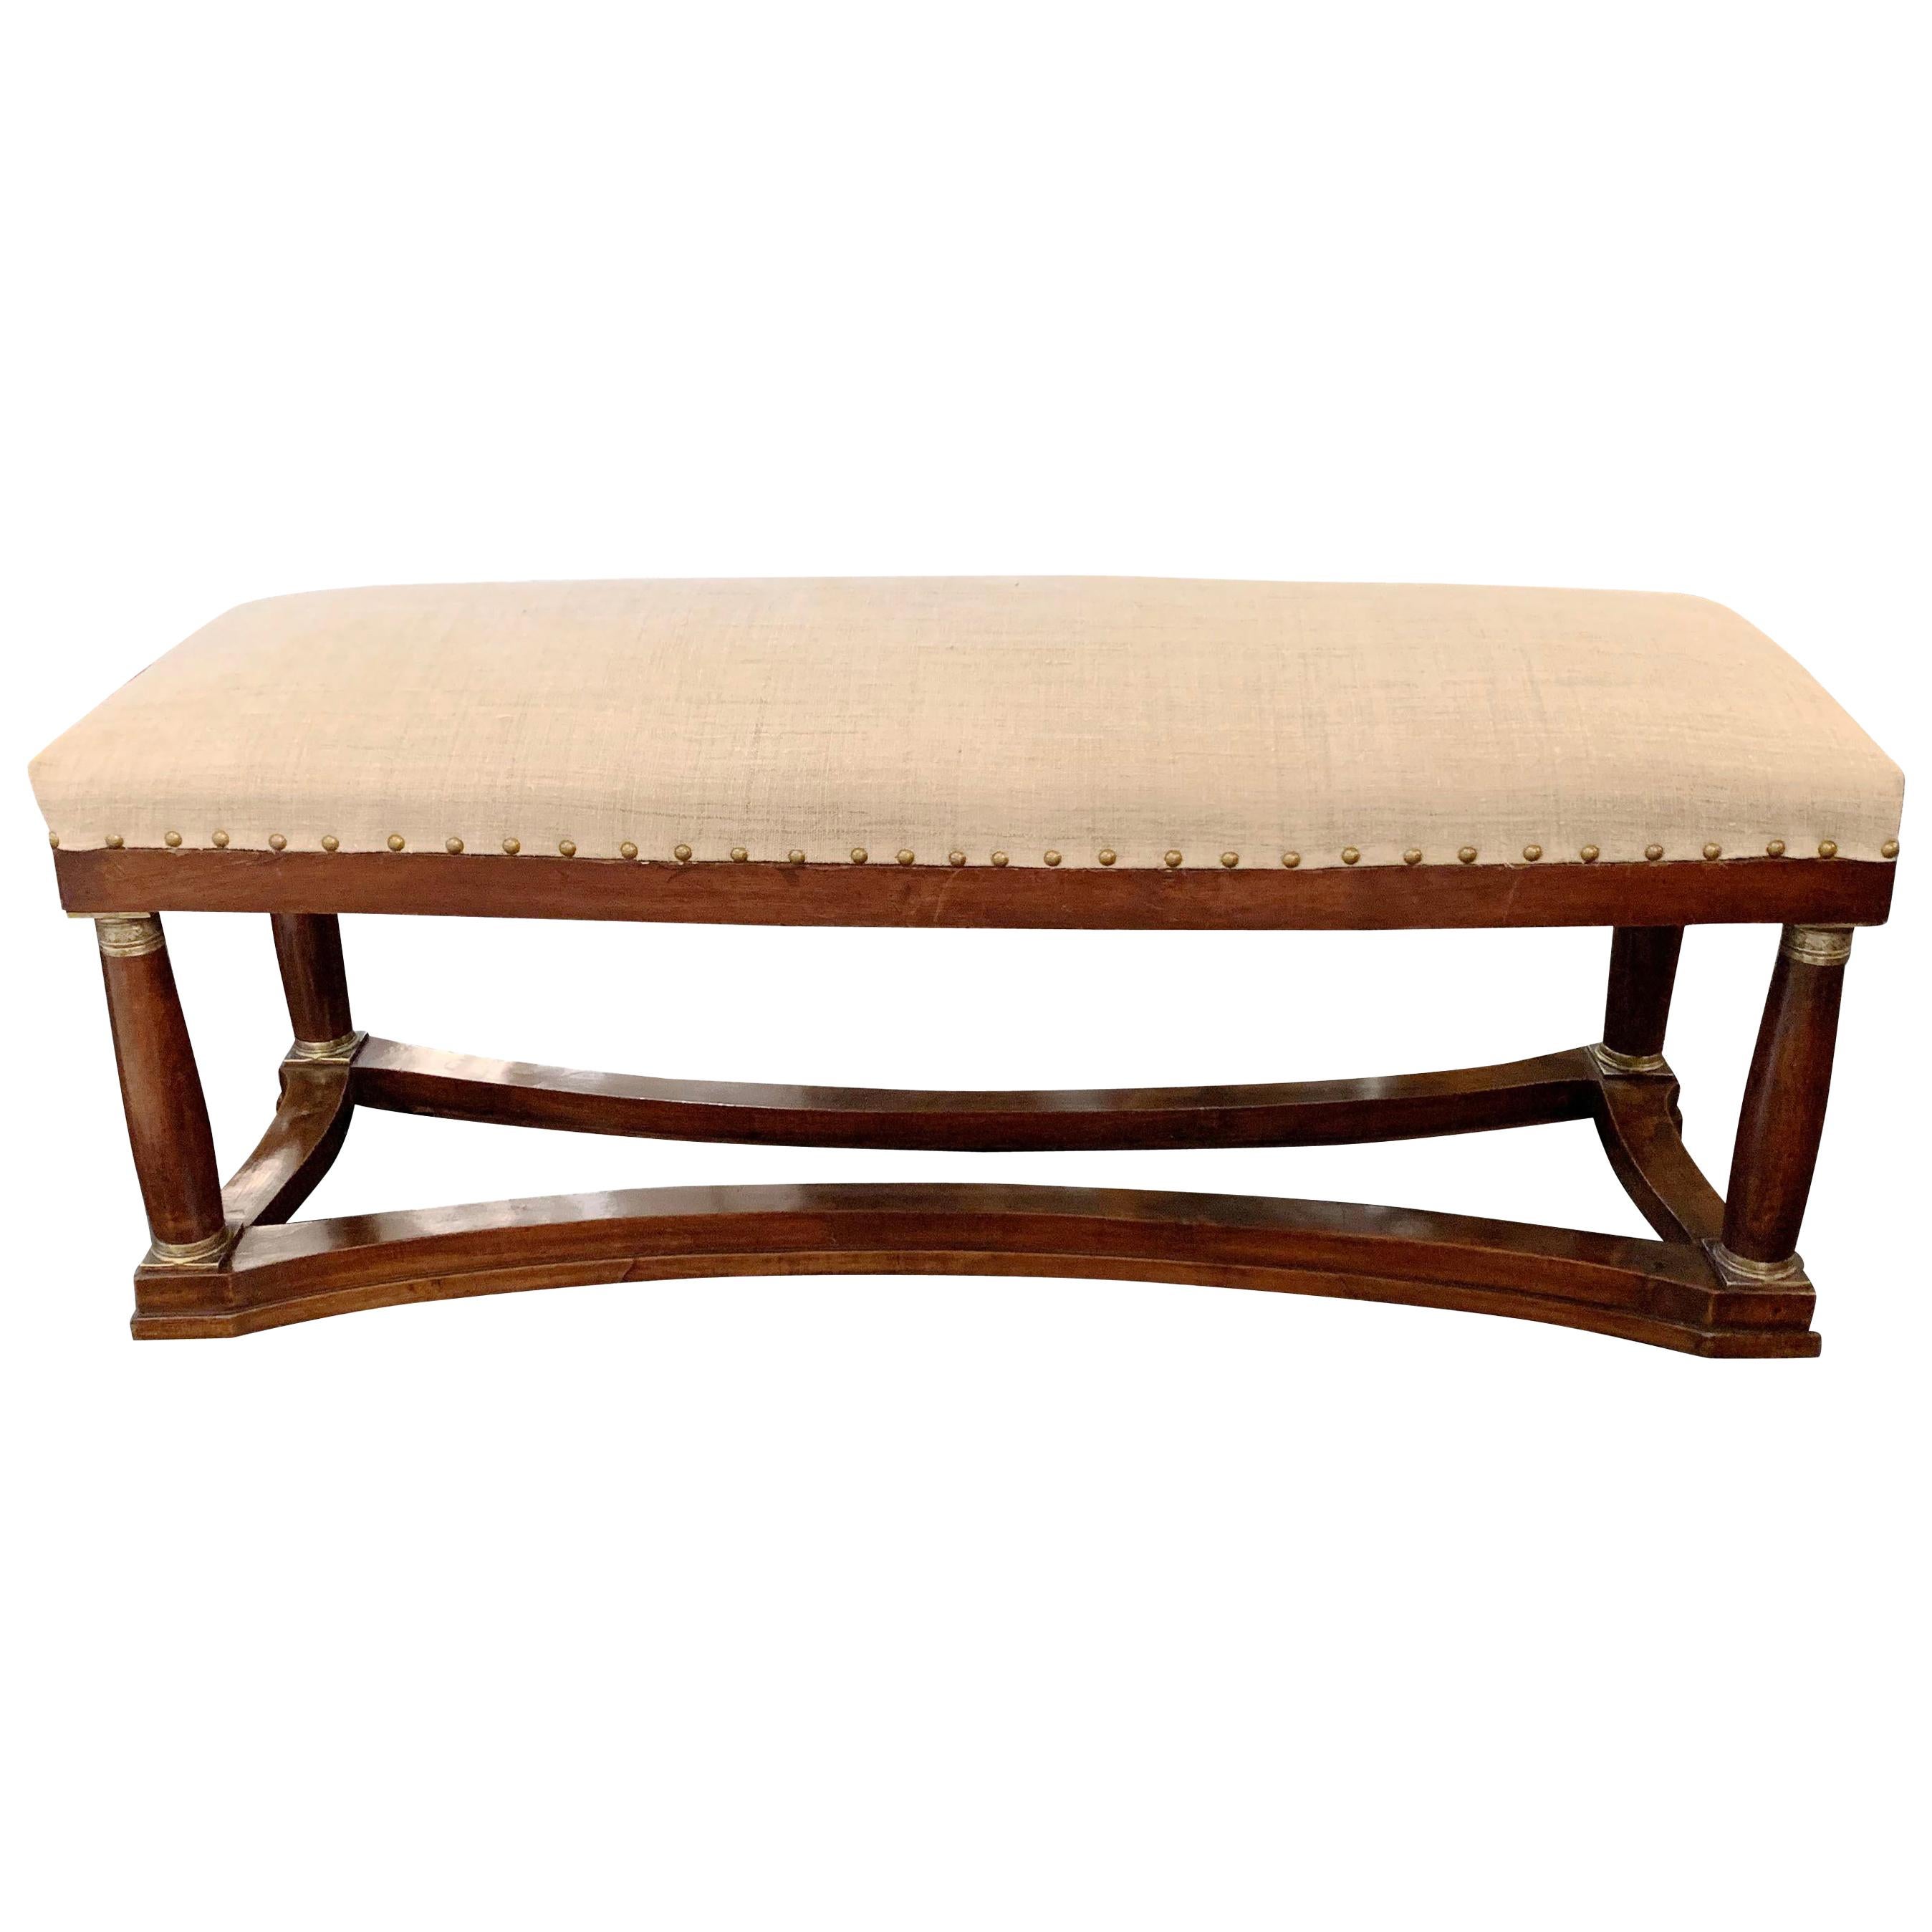 19th Century Upholstered Bench, France